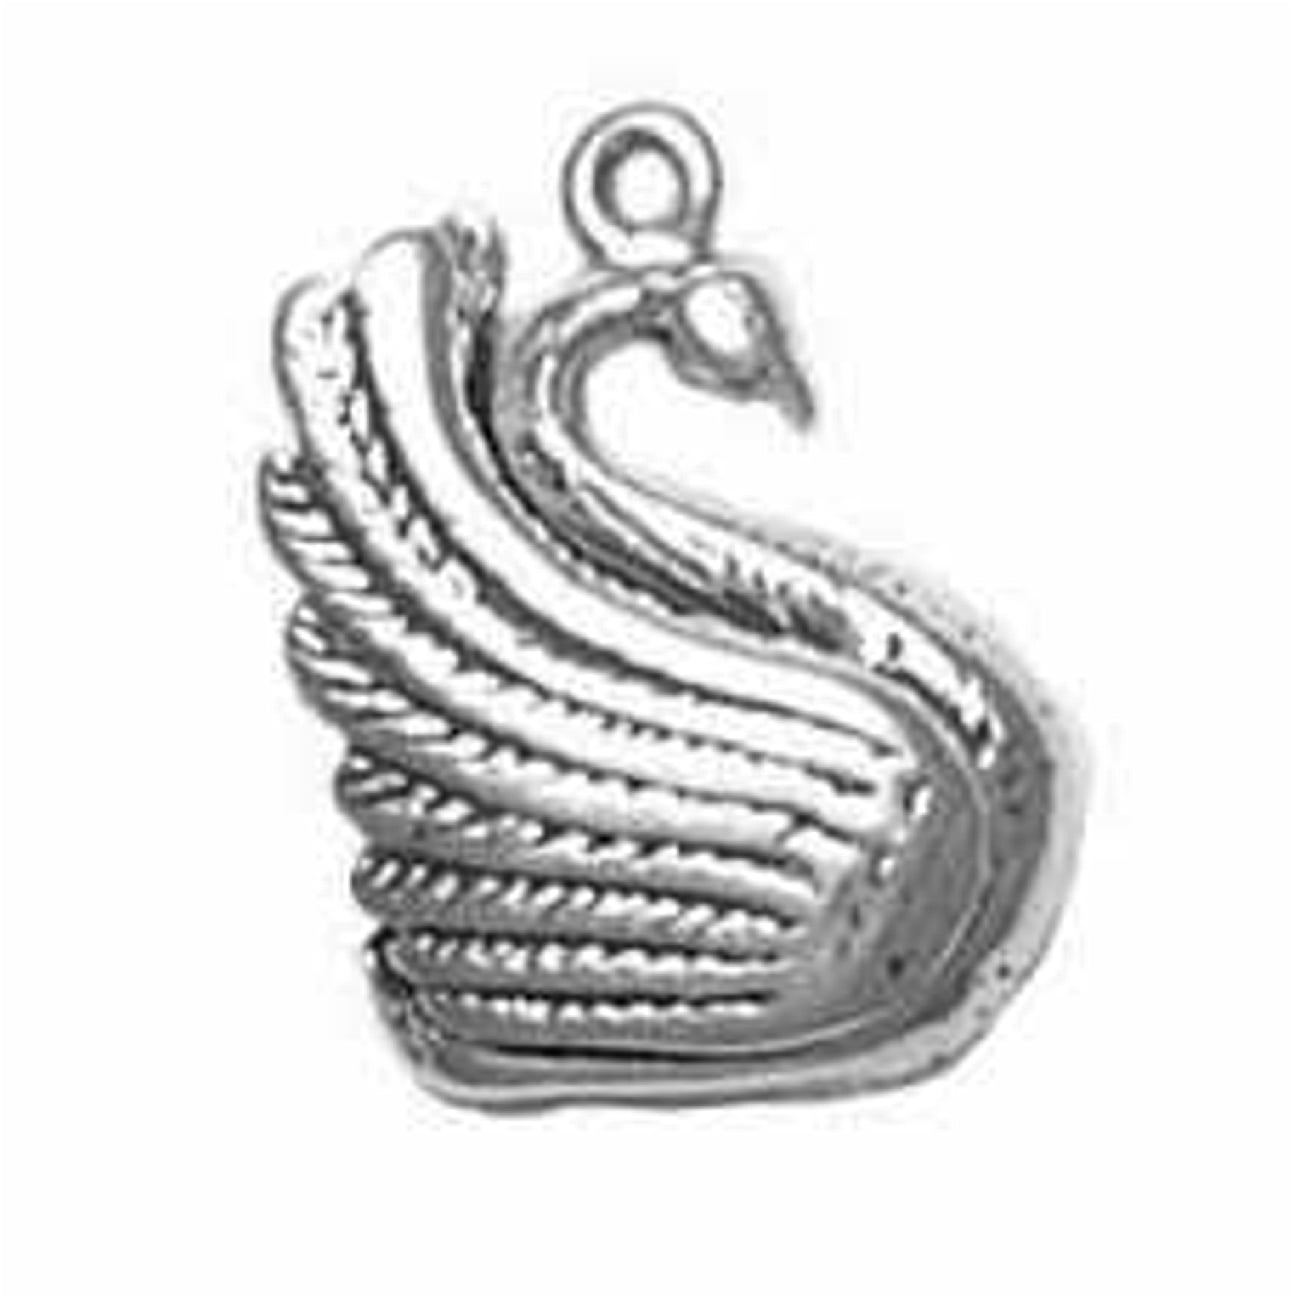 Boxed Brand New 925 Sterling Silver 3d Swan Charm Pendant